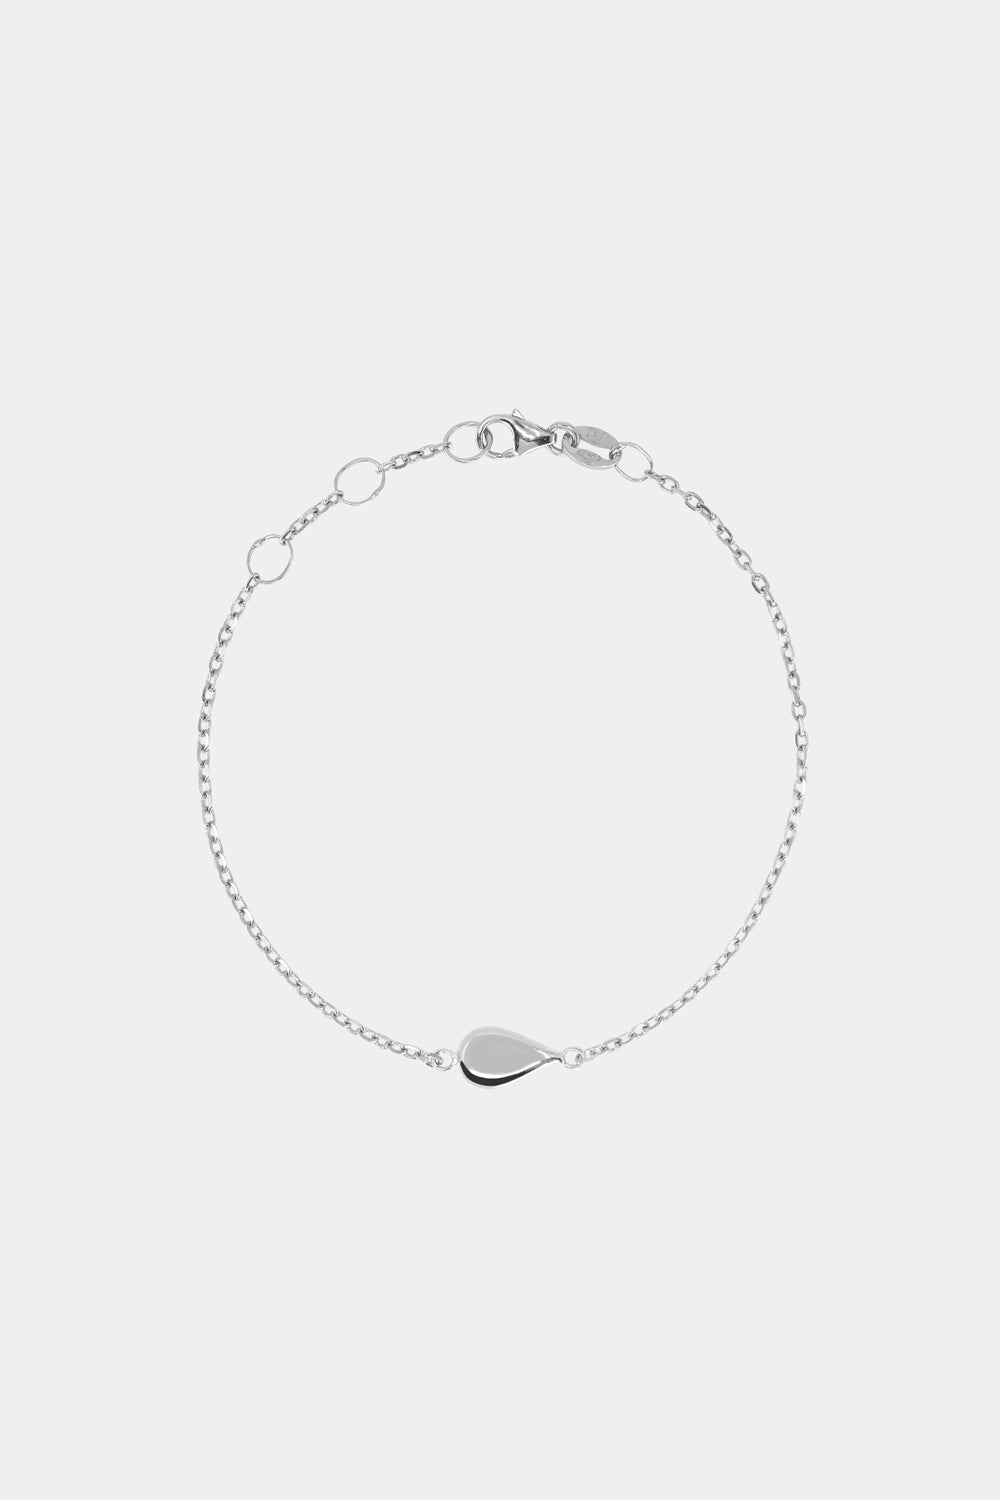 Pear Bracelet | Silver or 9K White Gold, More Options Available